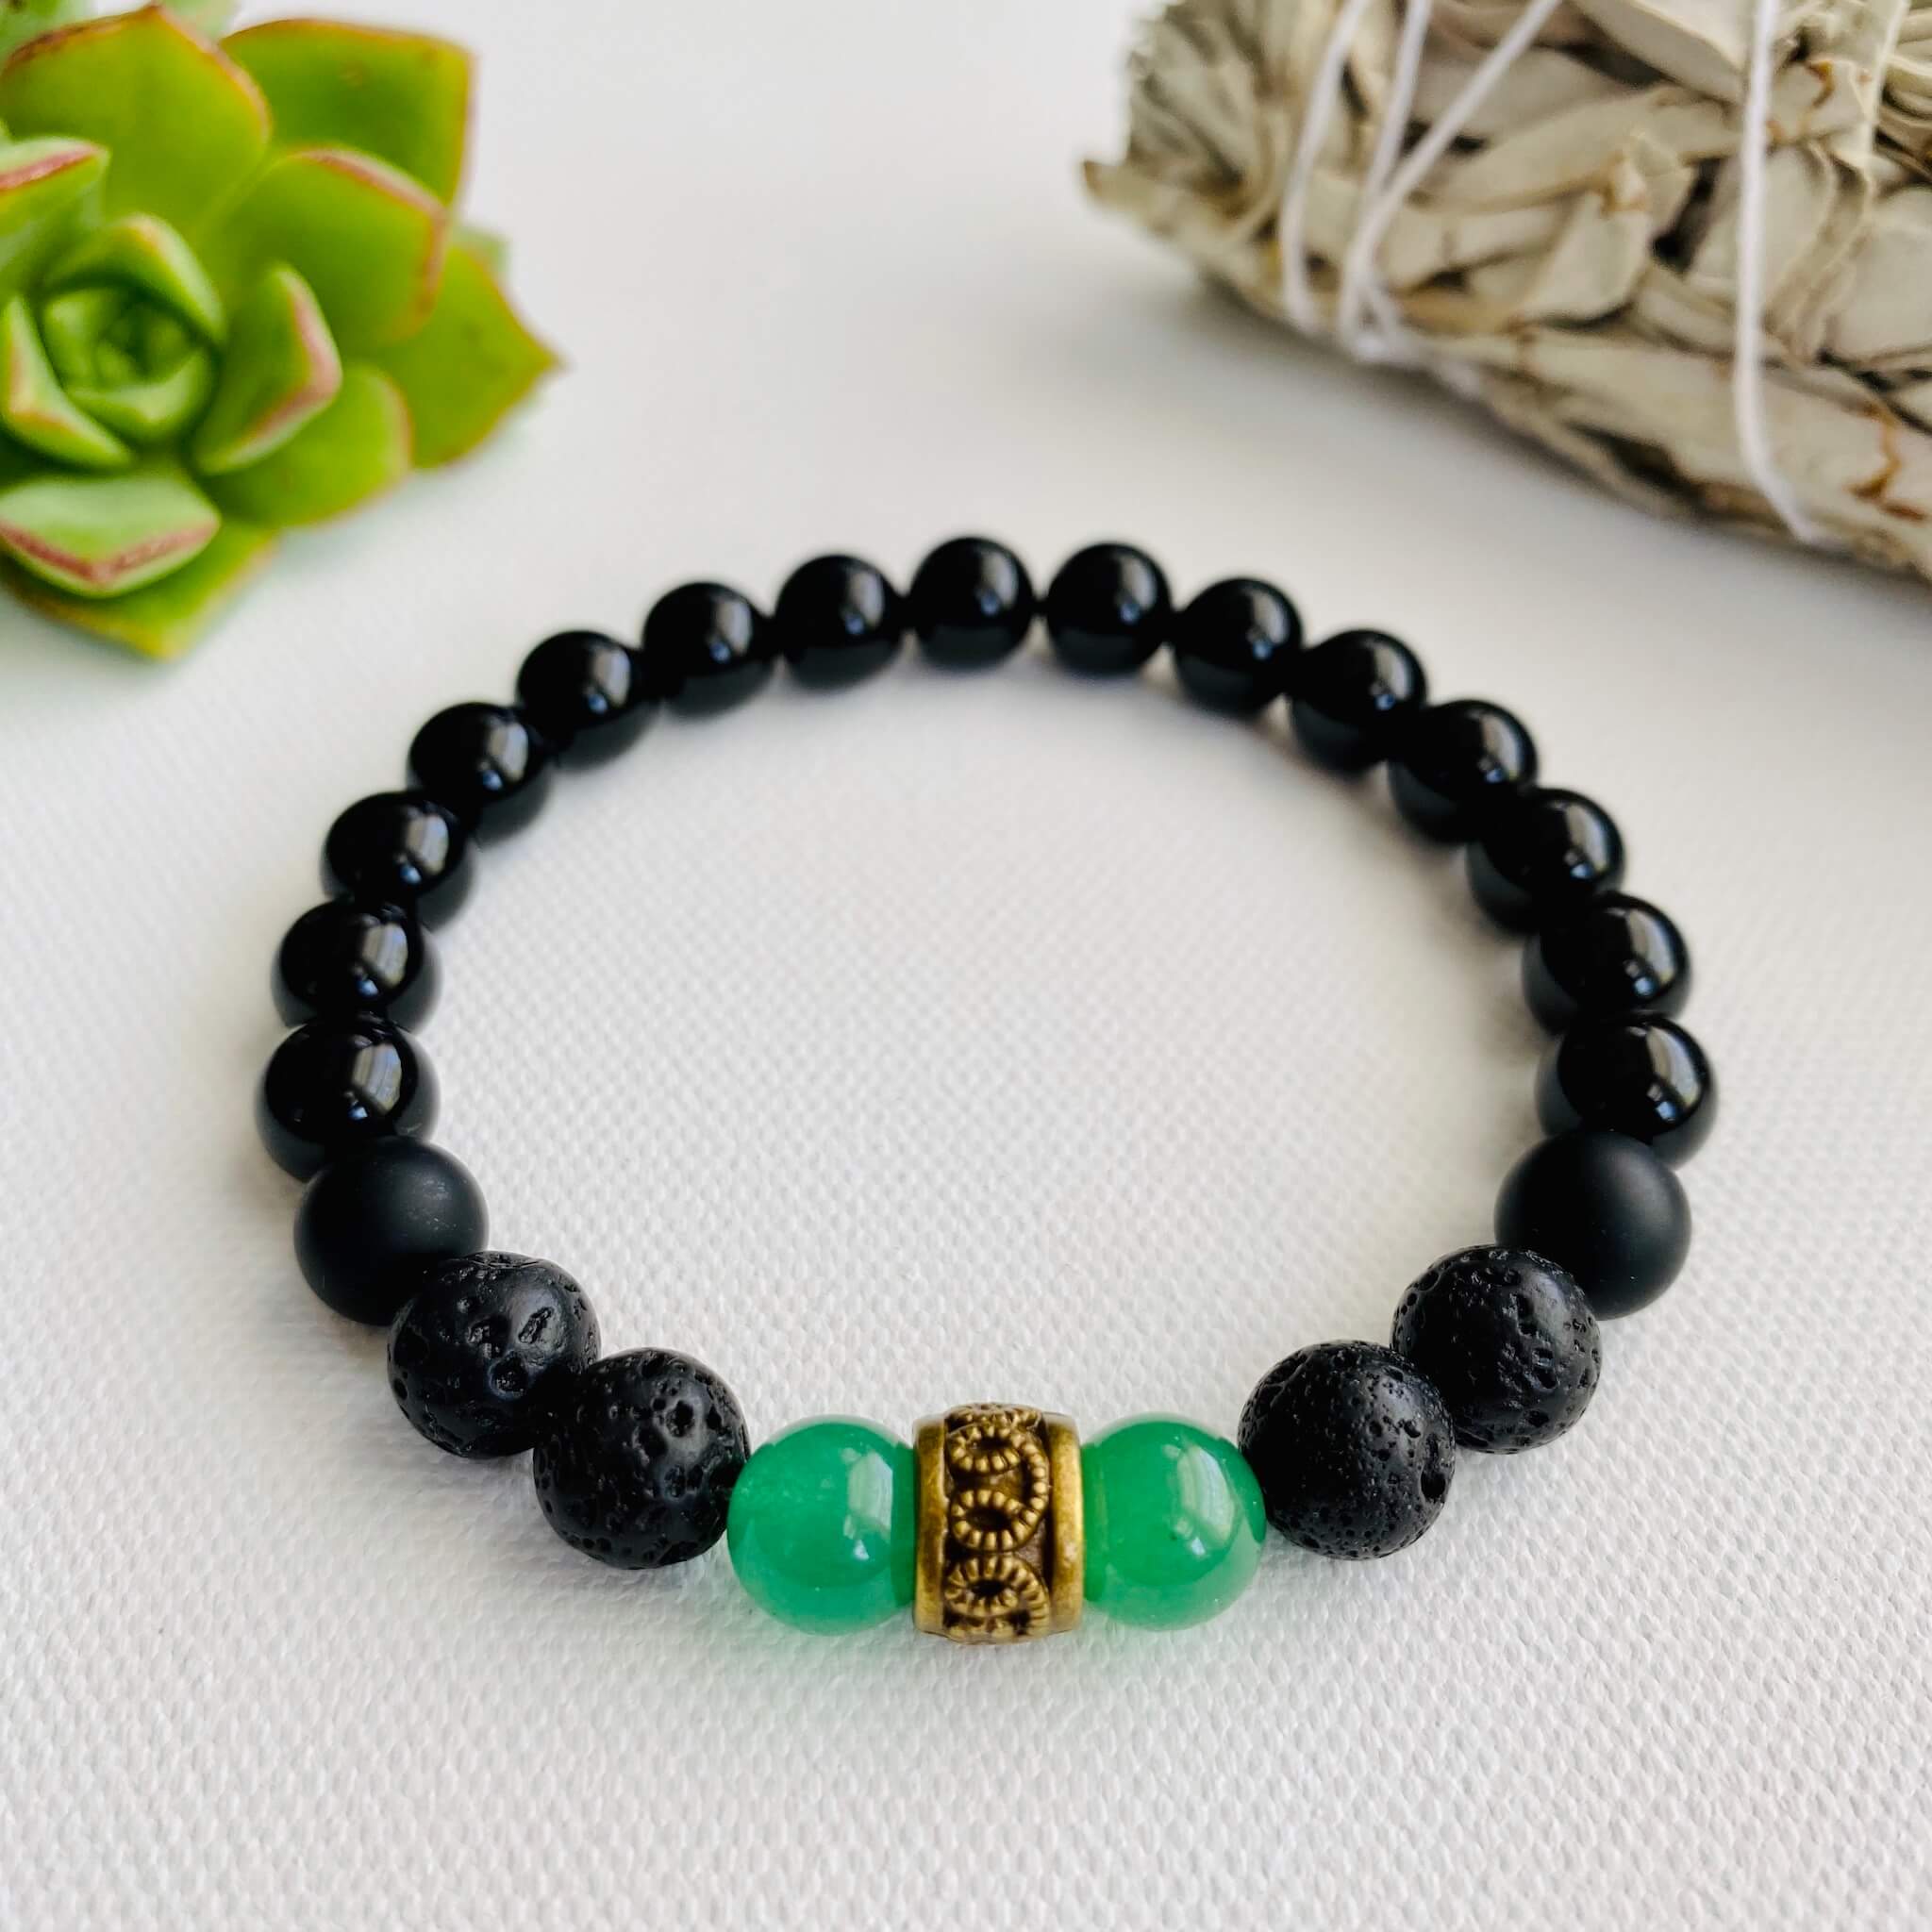 Buy Silver Stainless Steel with Green Tiger's Eye & Black Molten Lava Bead  Expandable 8mm Bracelet Online - Inox Jewelry India